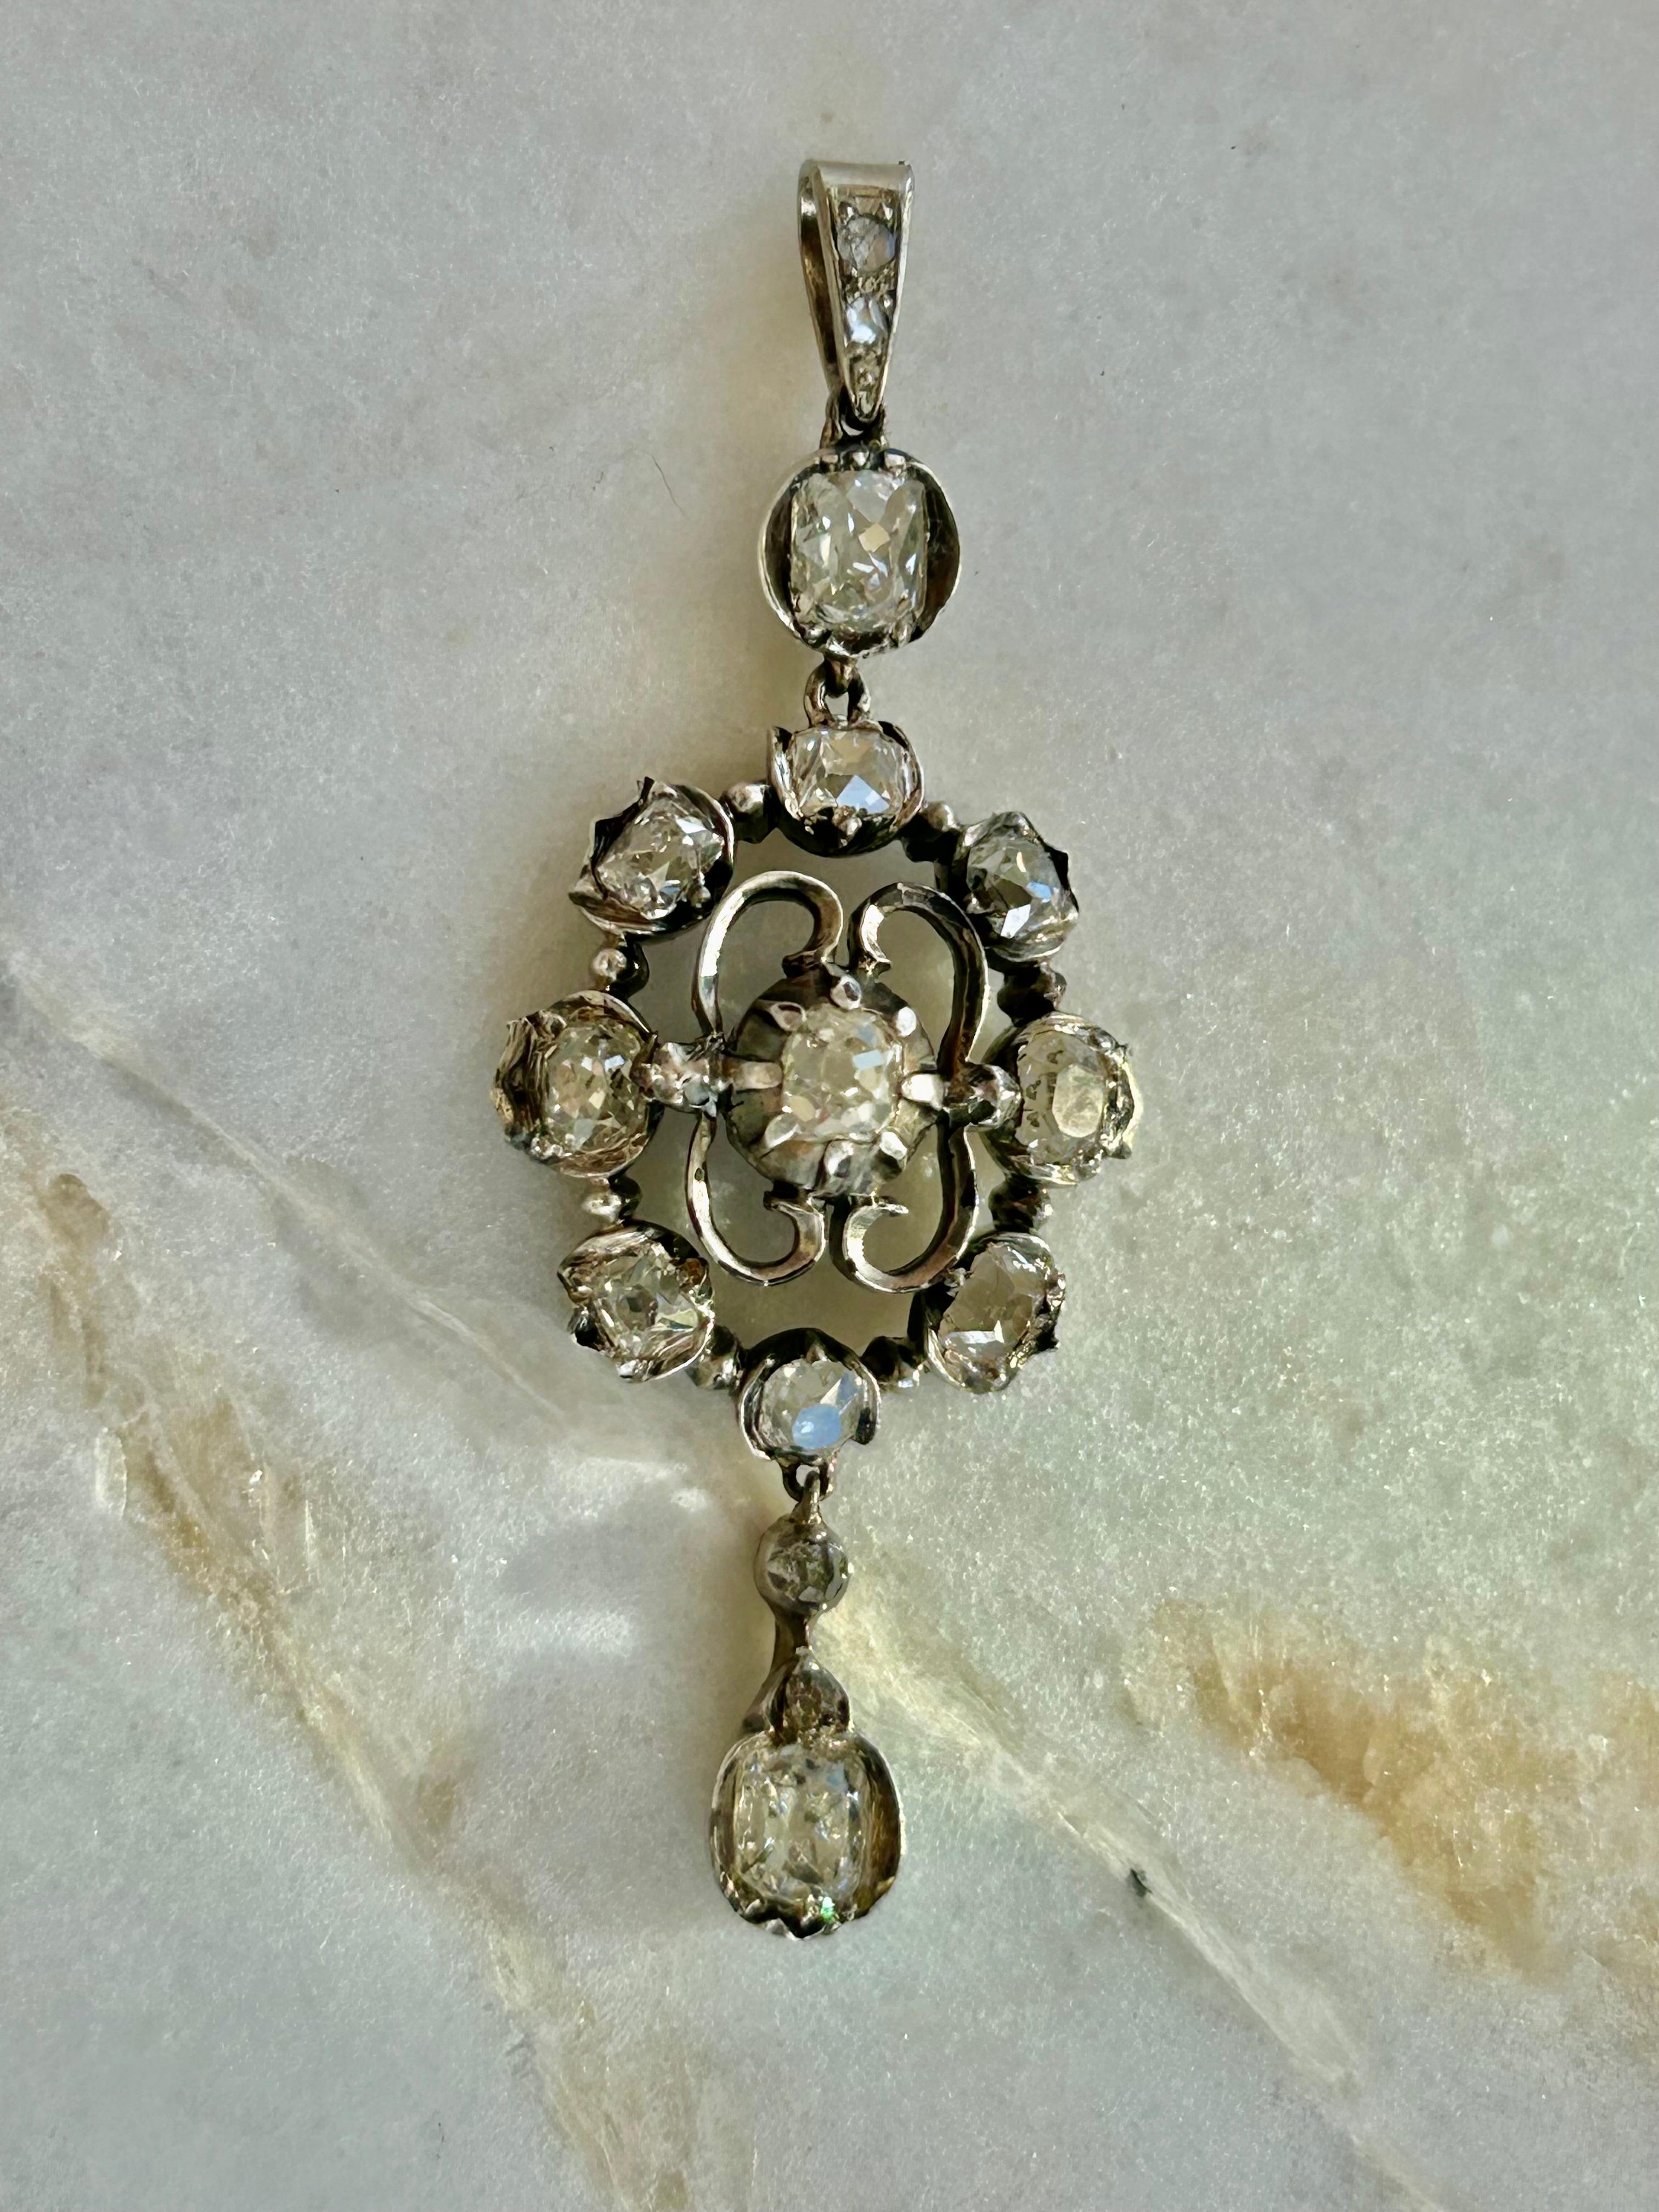 Elegant Georgian Era Pendant:

An Antique Georgian style with Old Mine Cut diamonds cut in a style that predates the typical old mine cut, which were created between the table cut and old mine cut, measuring a delicate 2 inches from top to bottom.